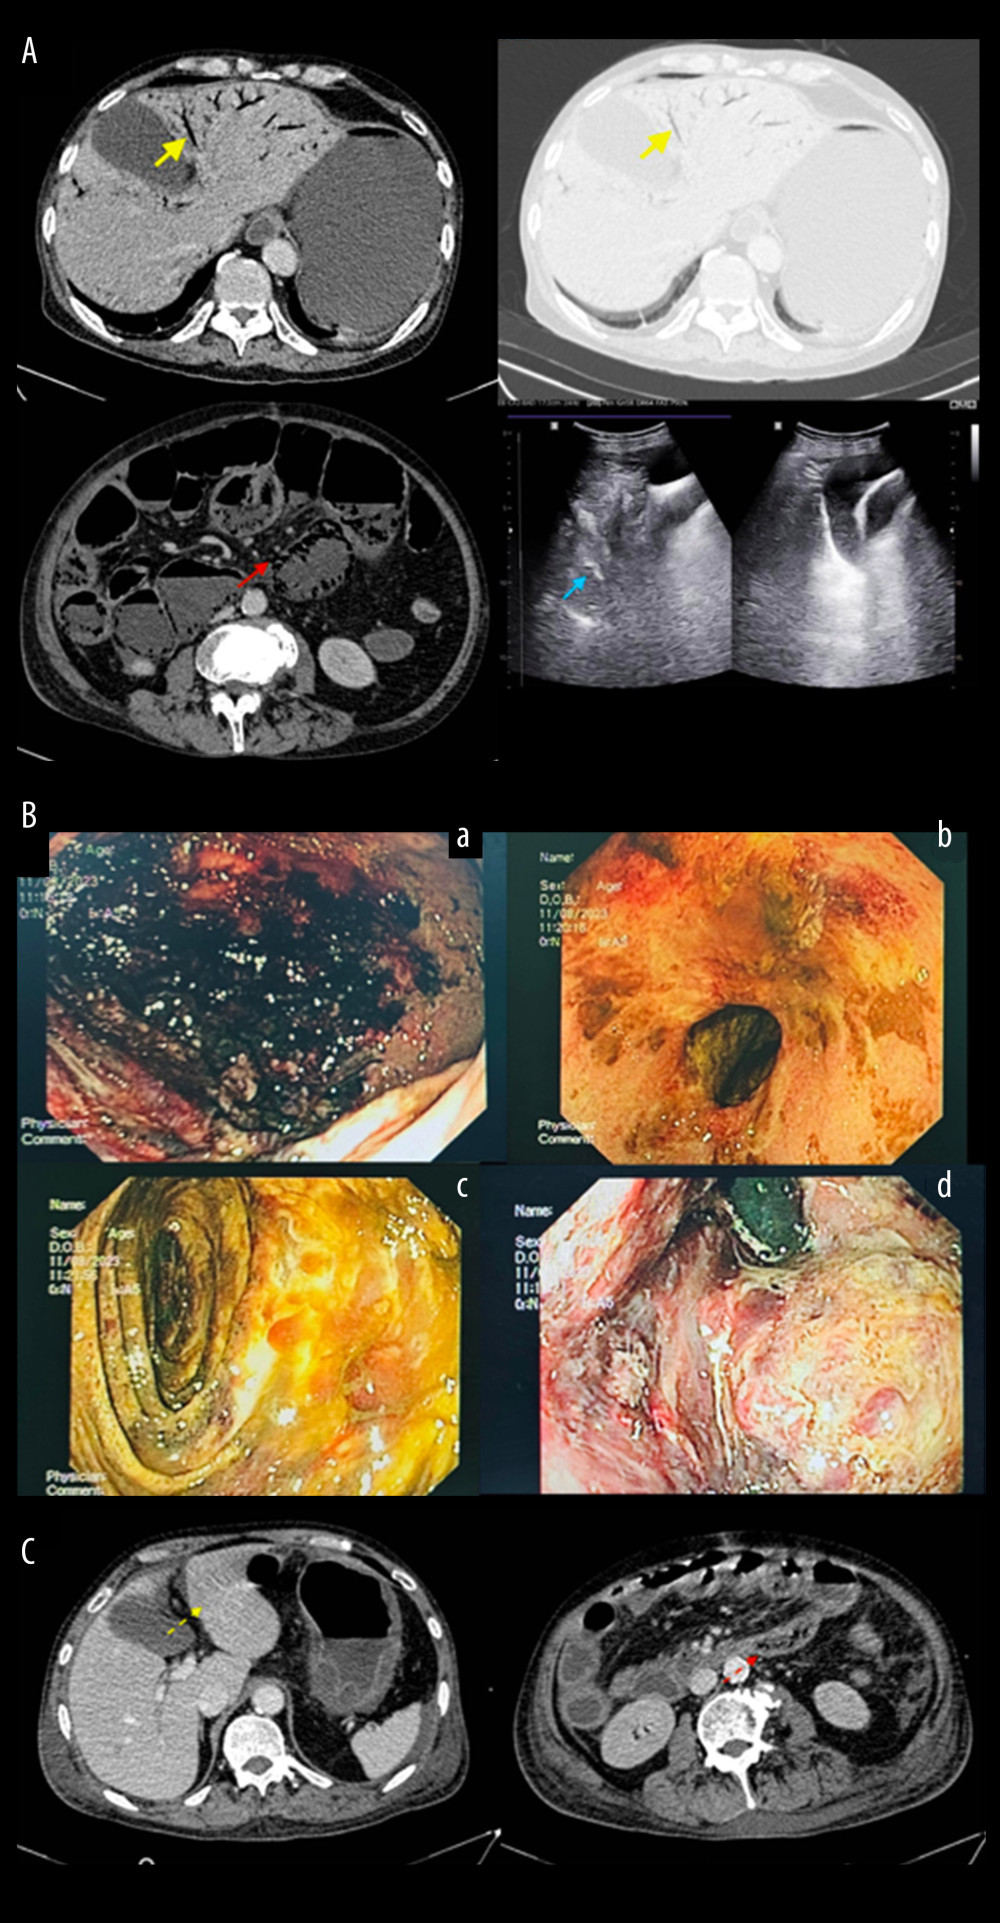 (A) Gas presence in the portal vein (yellow arrow) and intestinal wall (red arrow) detected by abdominal CT scan and sign of scattered “comet-tail” artefacts on abdominal ultrasound (blue arrow). (B) Mucosal bleeding of gastric body (a) and pyloric antrum (b), mucosal ischemia of superior part of duodenum (c), and cardia (d). (C) Gas bubbles in the portal vein and intestinal wall disappeared after 3 days of resuscitation treatment (yellow and red dashed arrow).